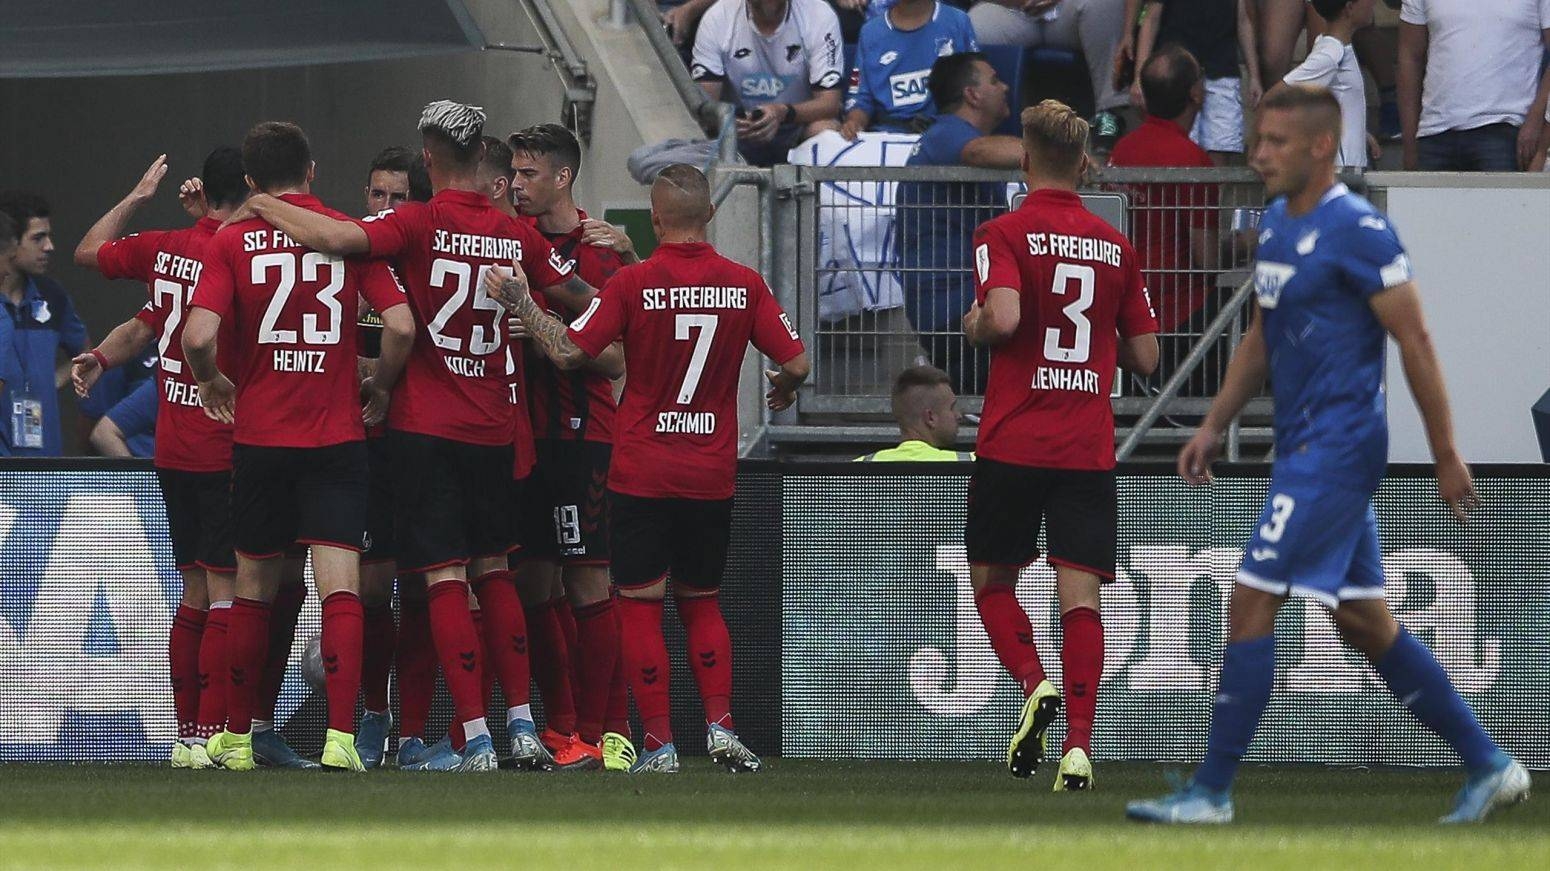 Freiburg grabs third win in four Bundesliga games, easing past hosts Hoffenheim 3-0 on Sunday to climb to third place with their best-ever league start. — Courtesy photo